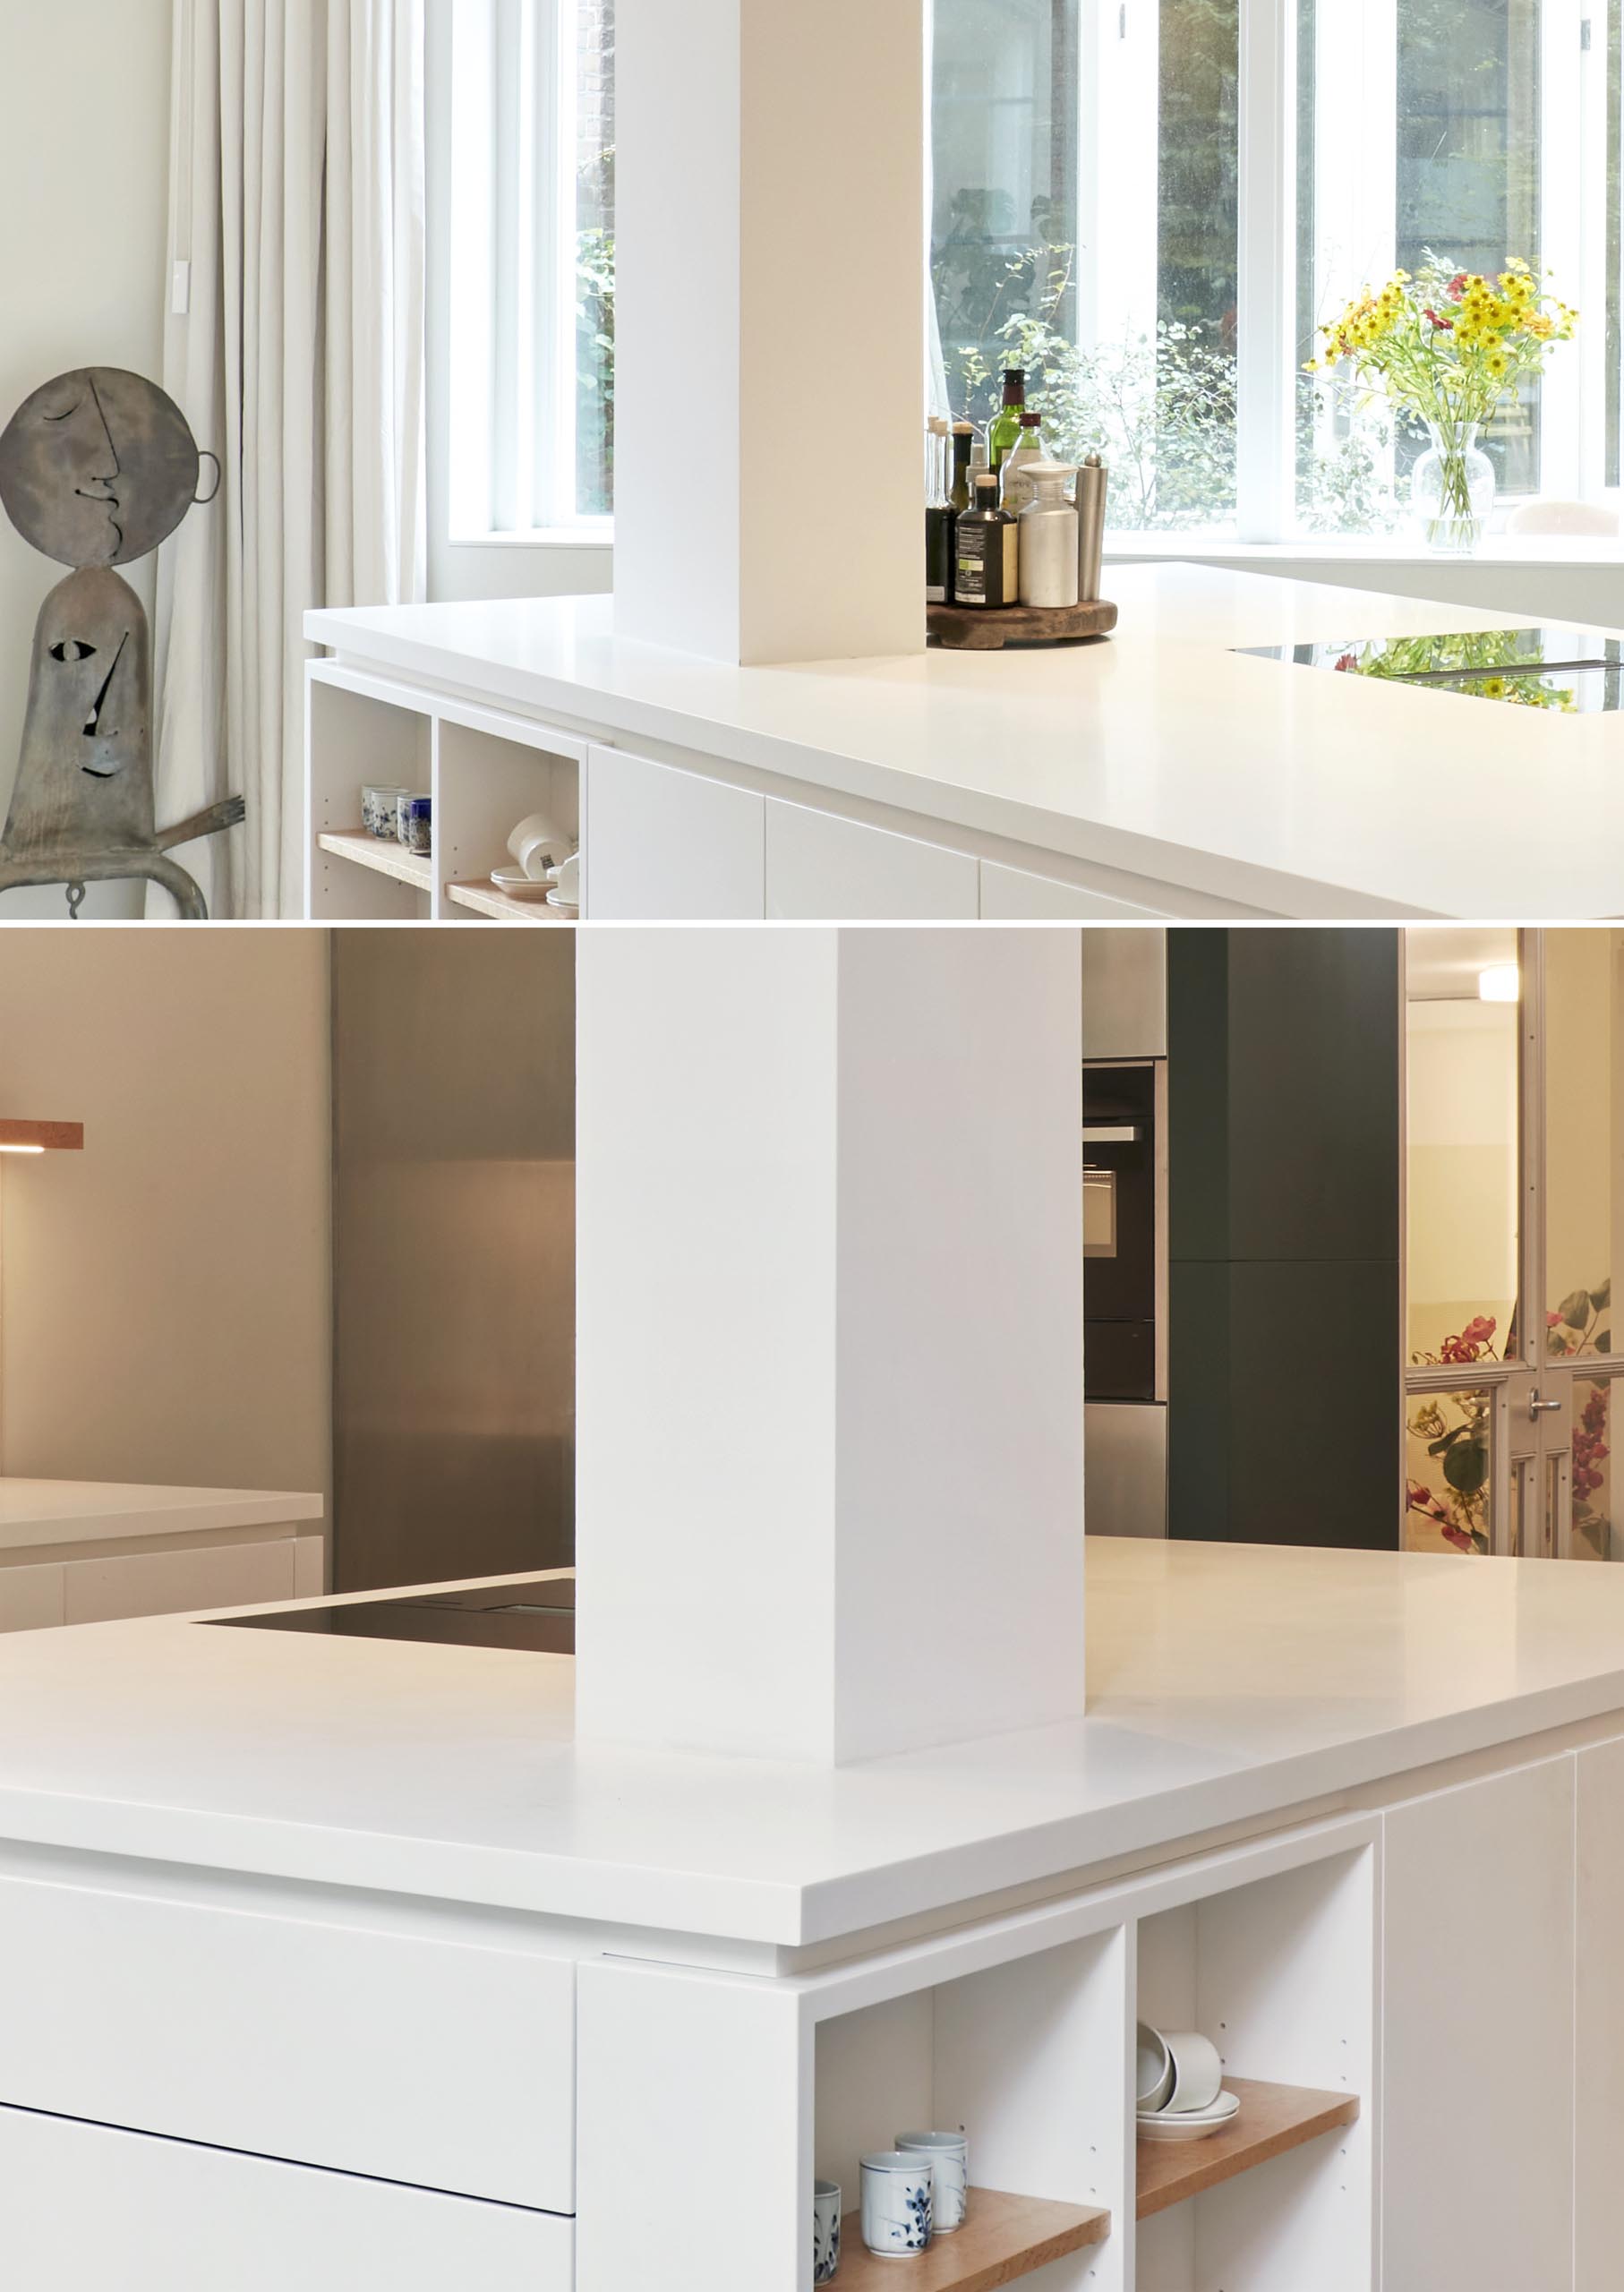 A modern white kitchen with a large island that has the counterop wrap around a tall column.